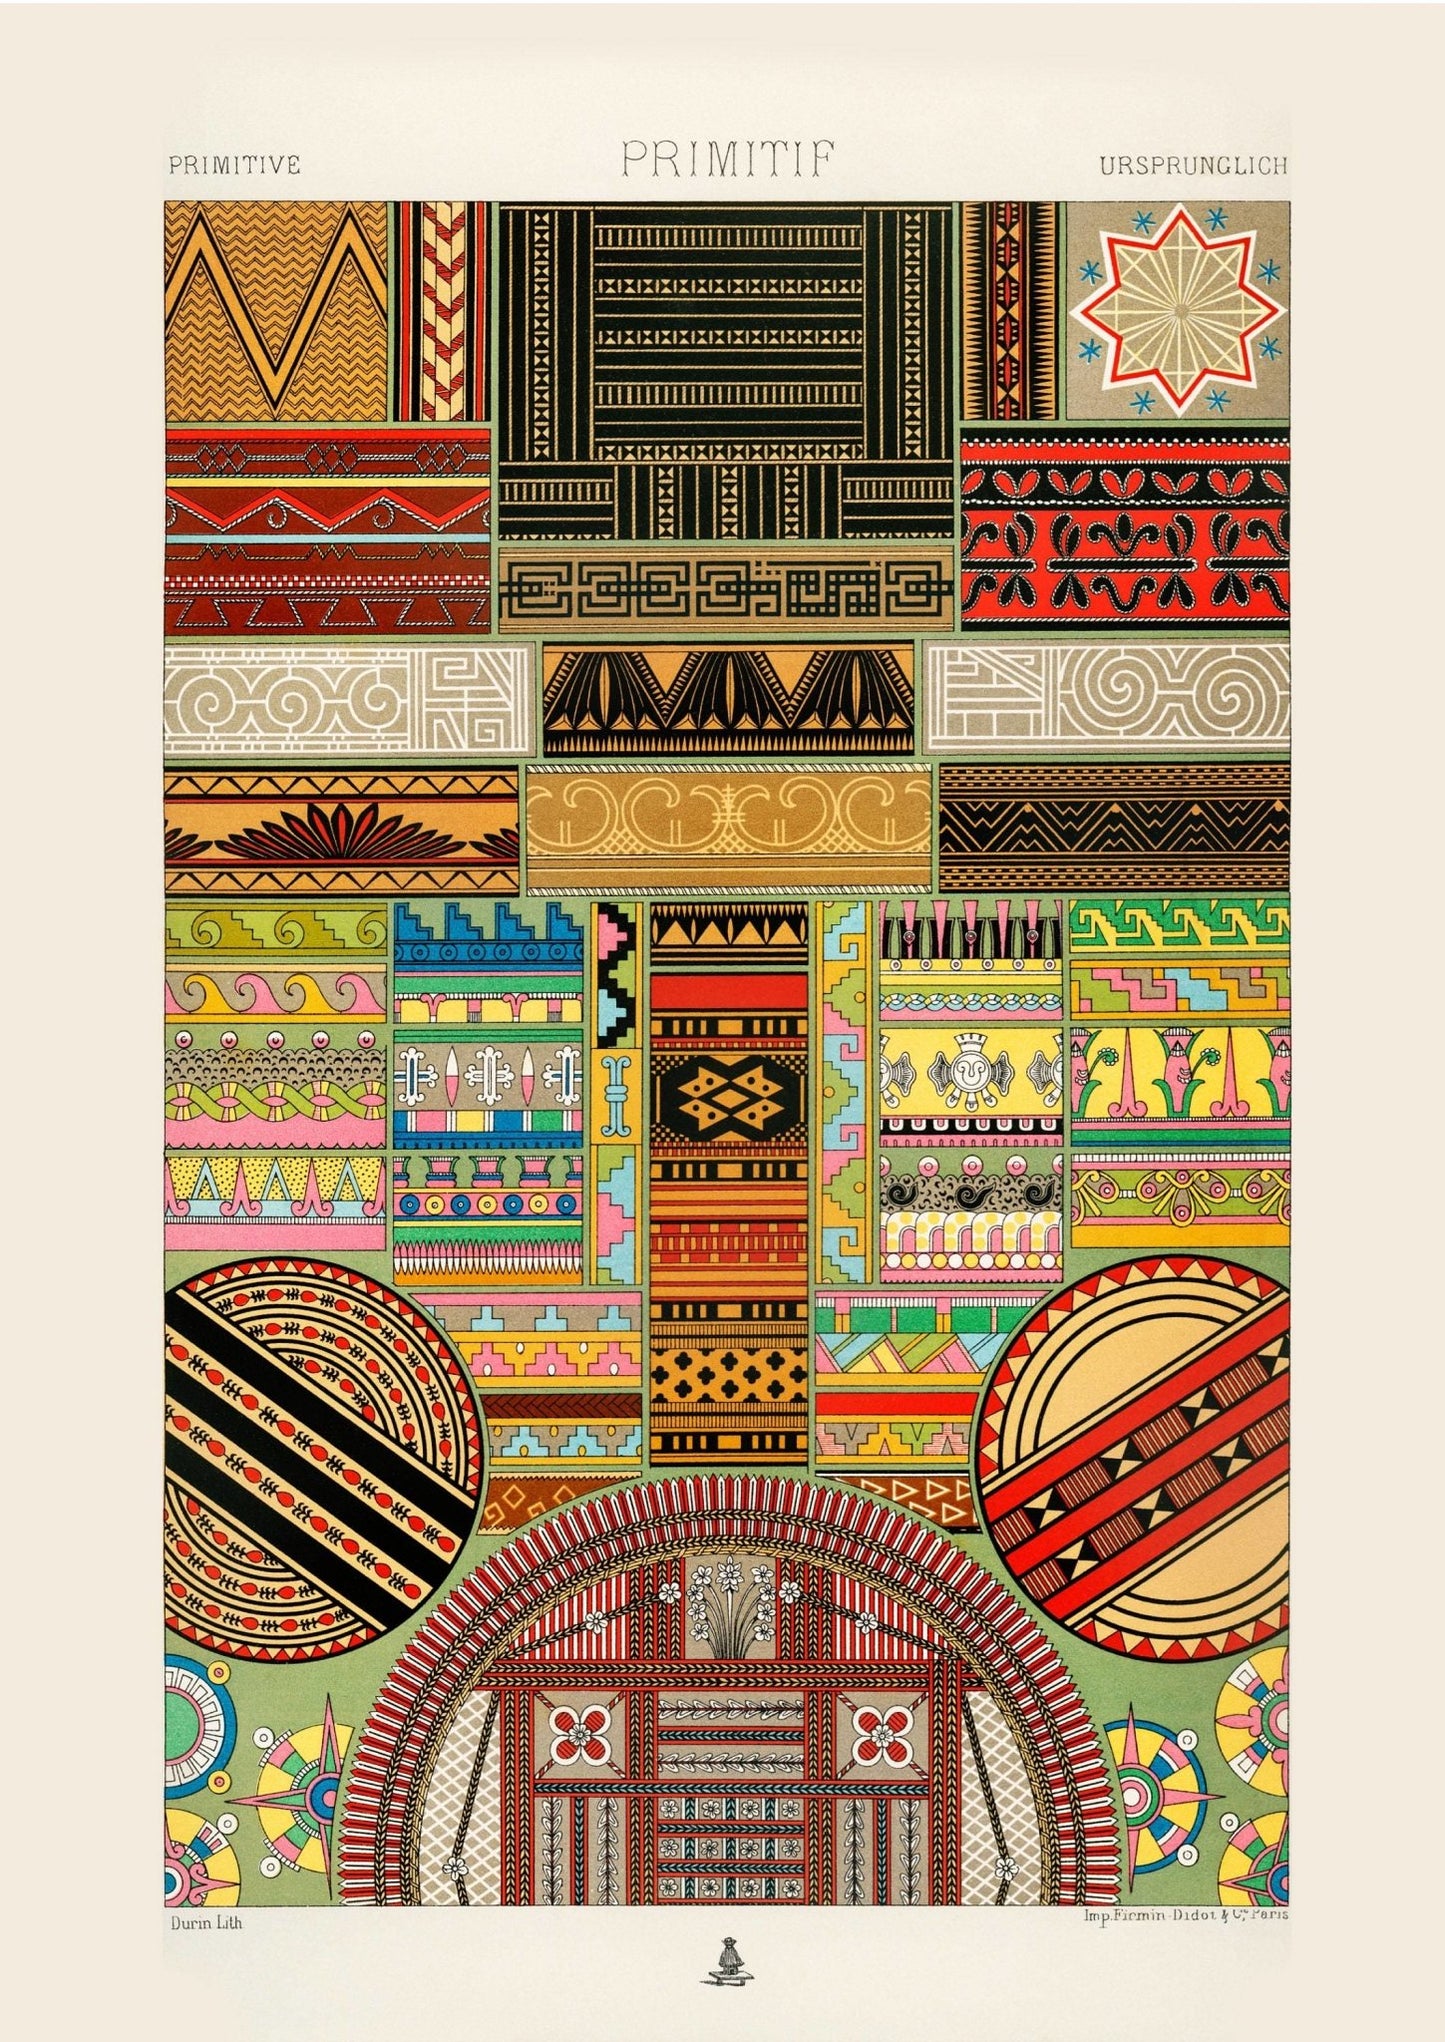 ALBERT RACINET - Primitive Pattern Lithograph from 'L'ornement Polychrome'